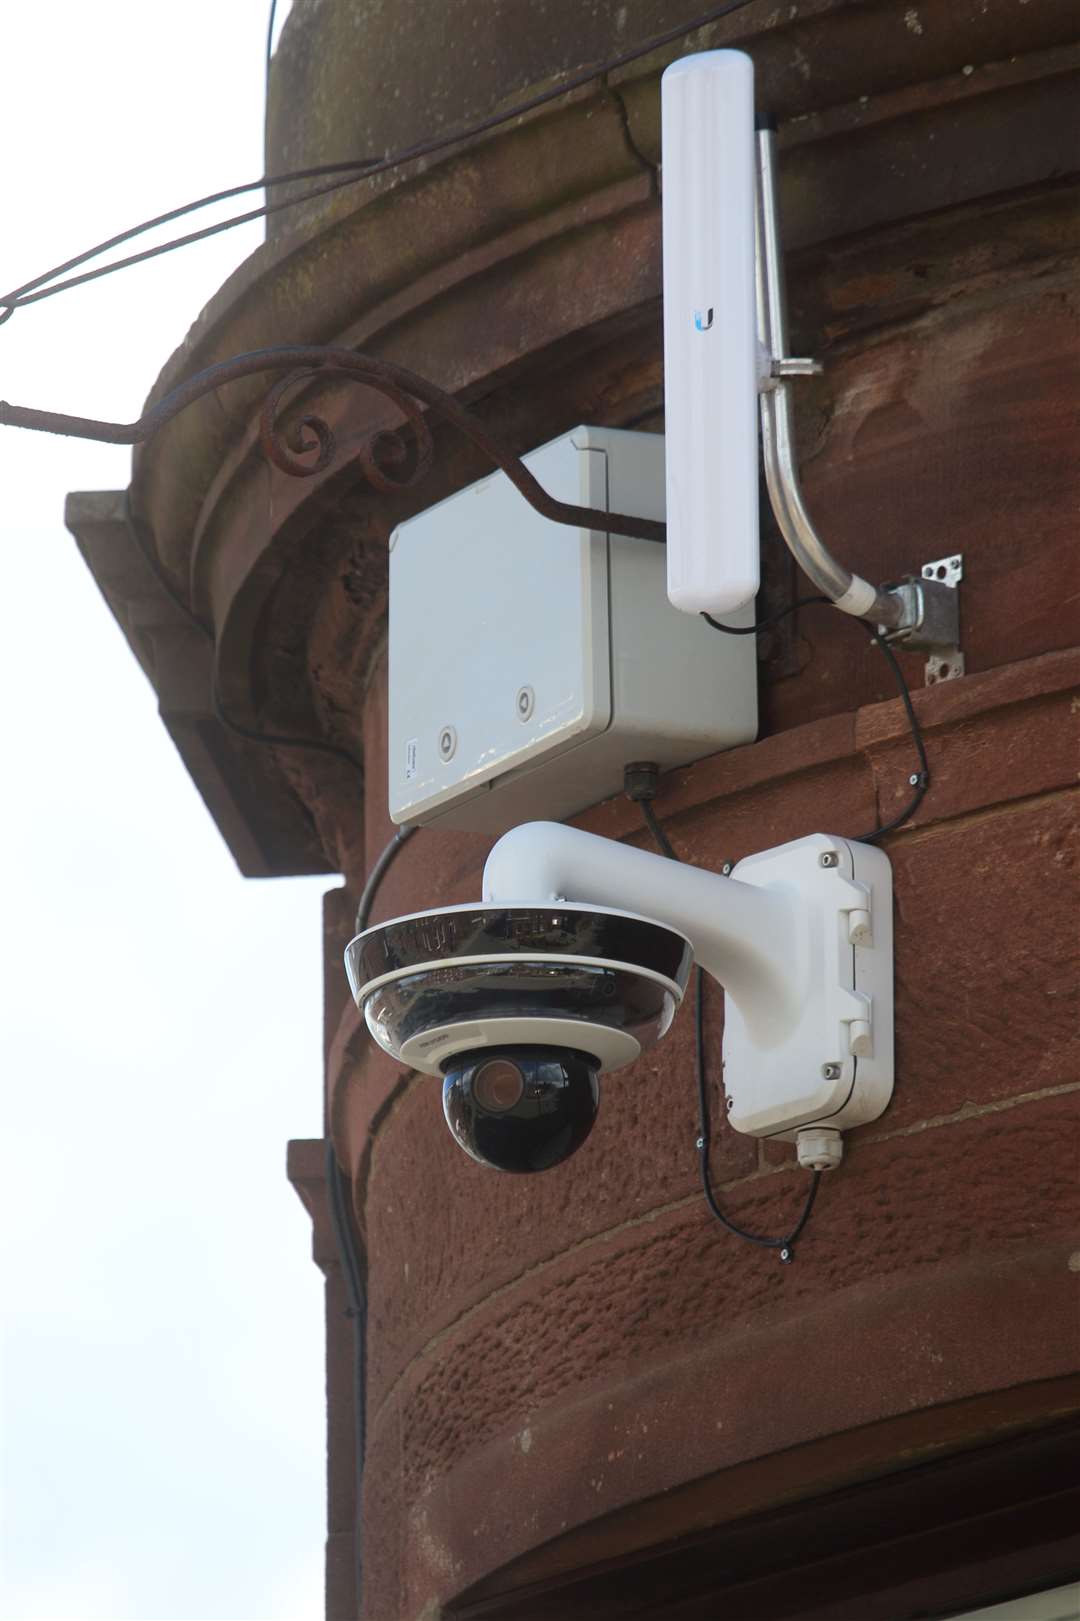 Projects to install CCTV in Turriff and Ellon have received a funding boost.